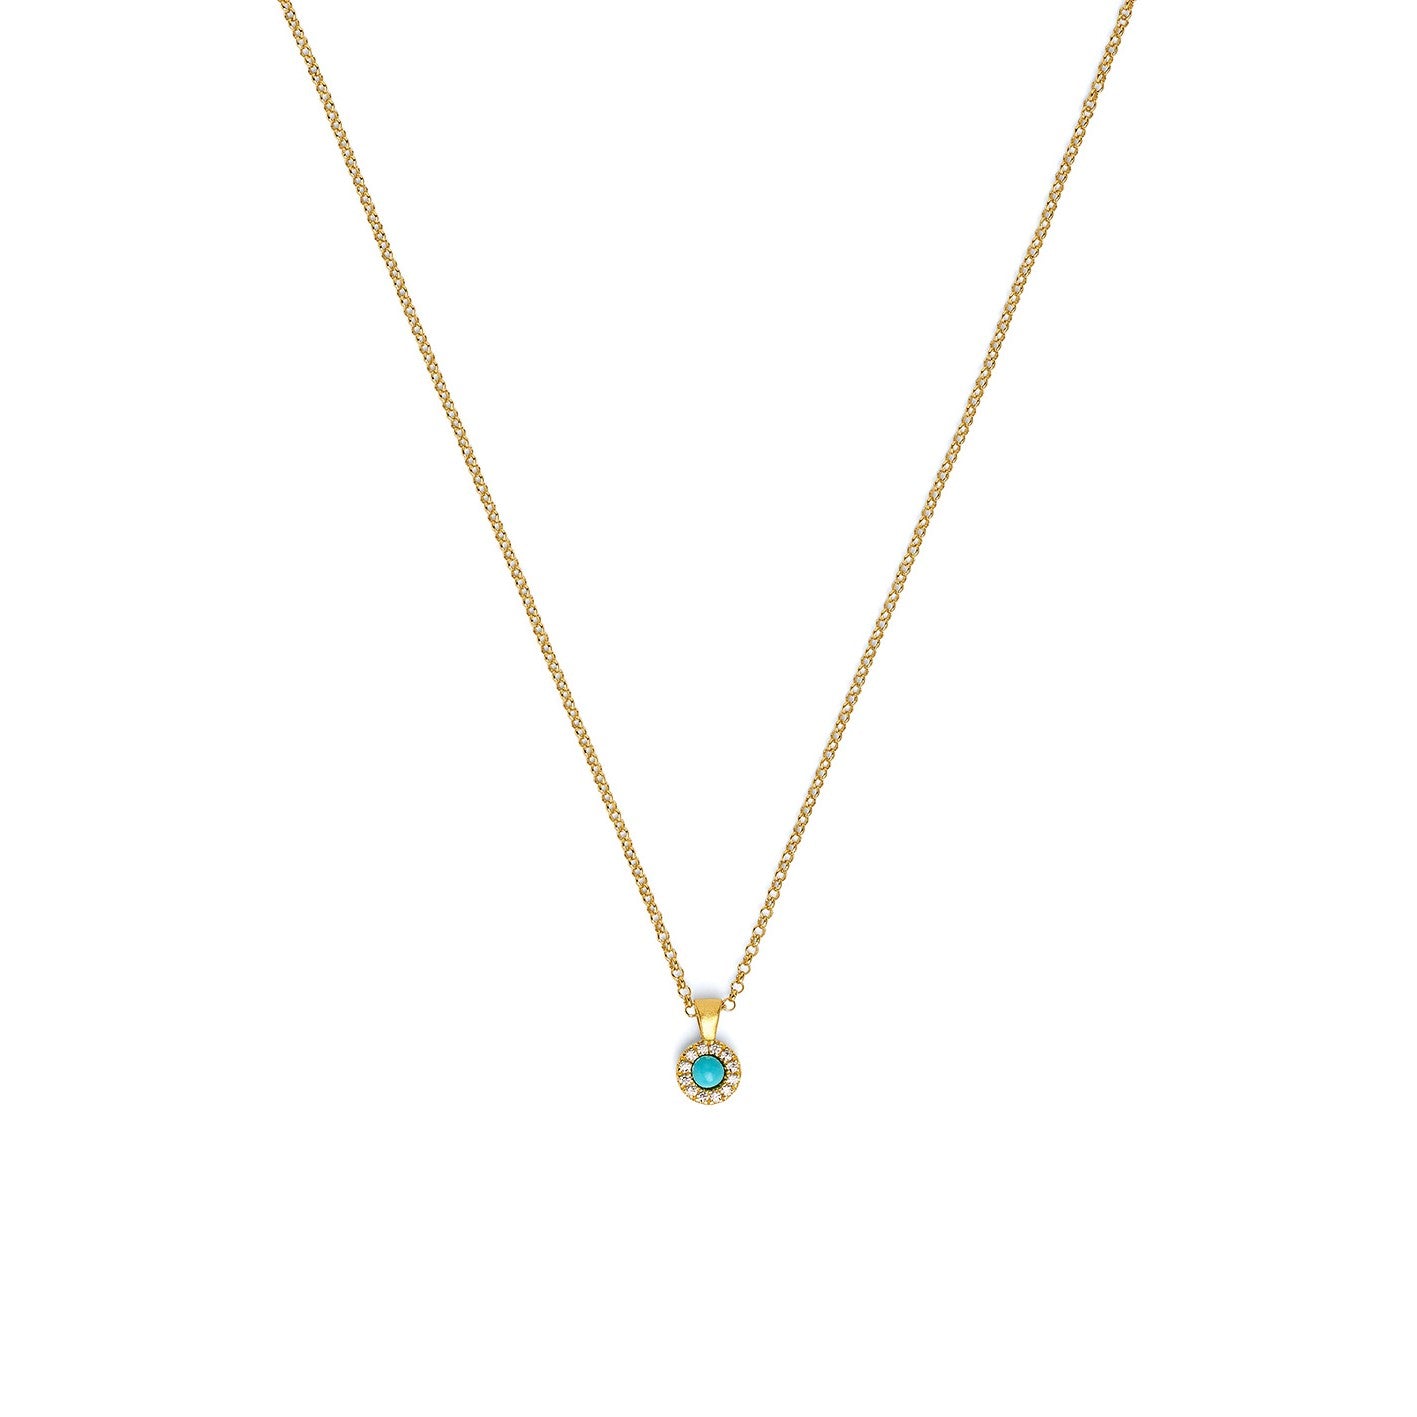 Bernd Wolf Collection "Arenia" Turquoise & CZ Necklace